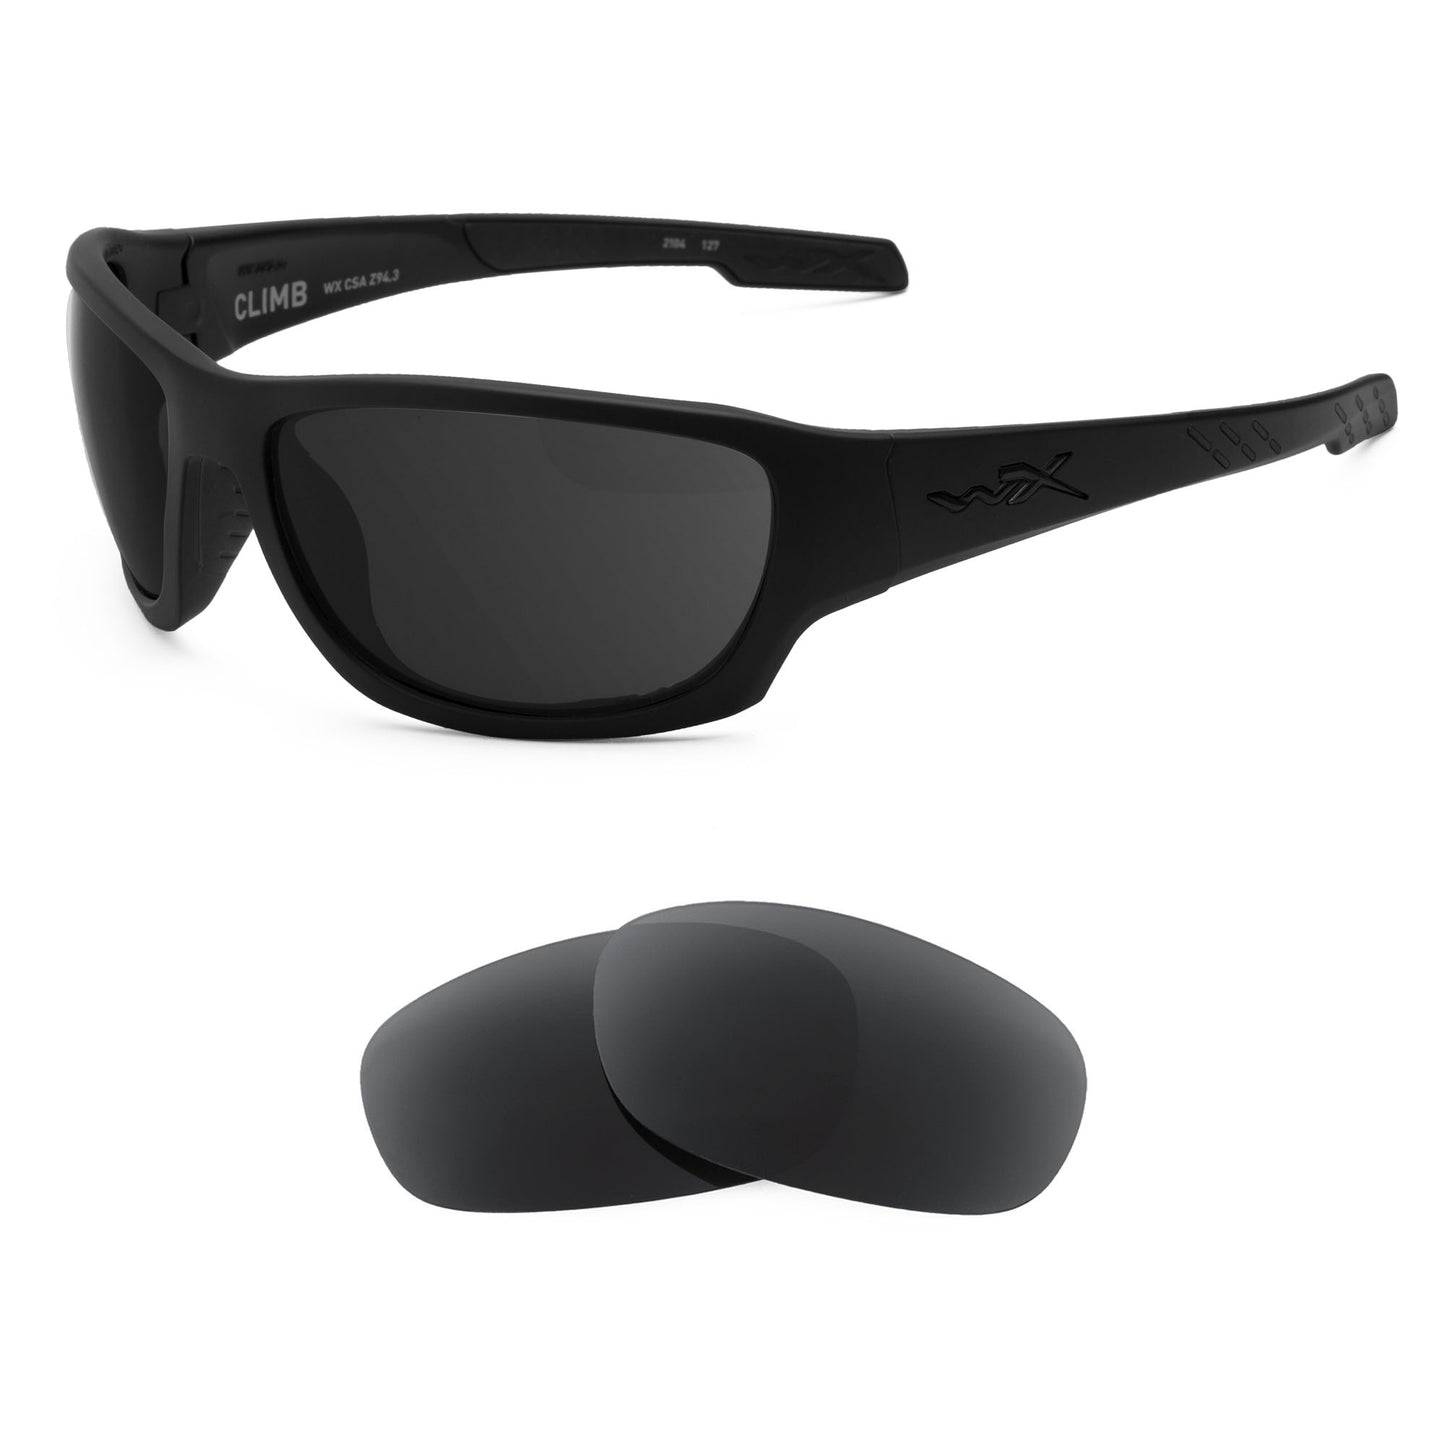 Wiley X Climb sunglasses with replacement lenses